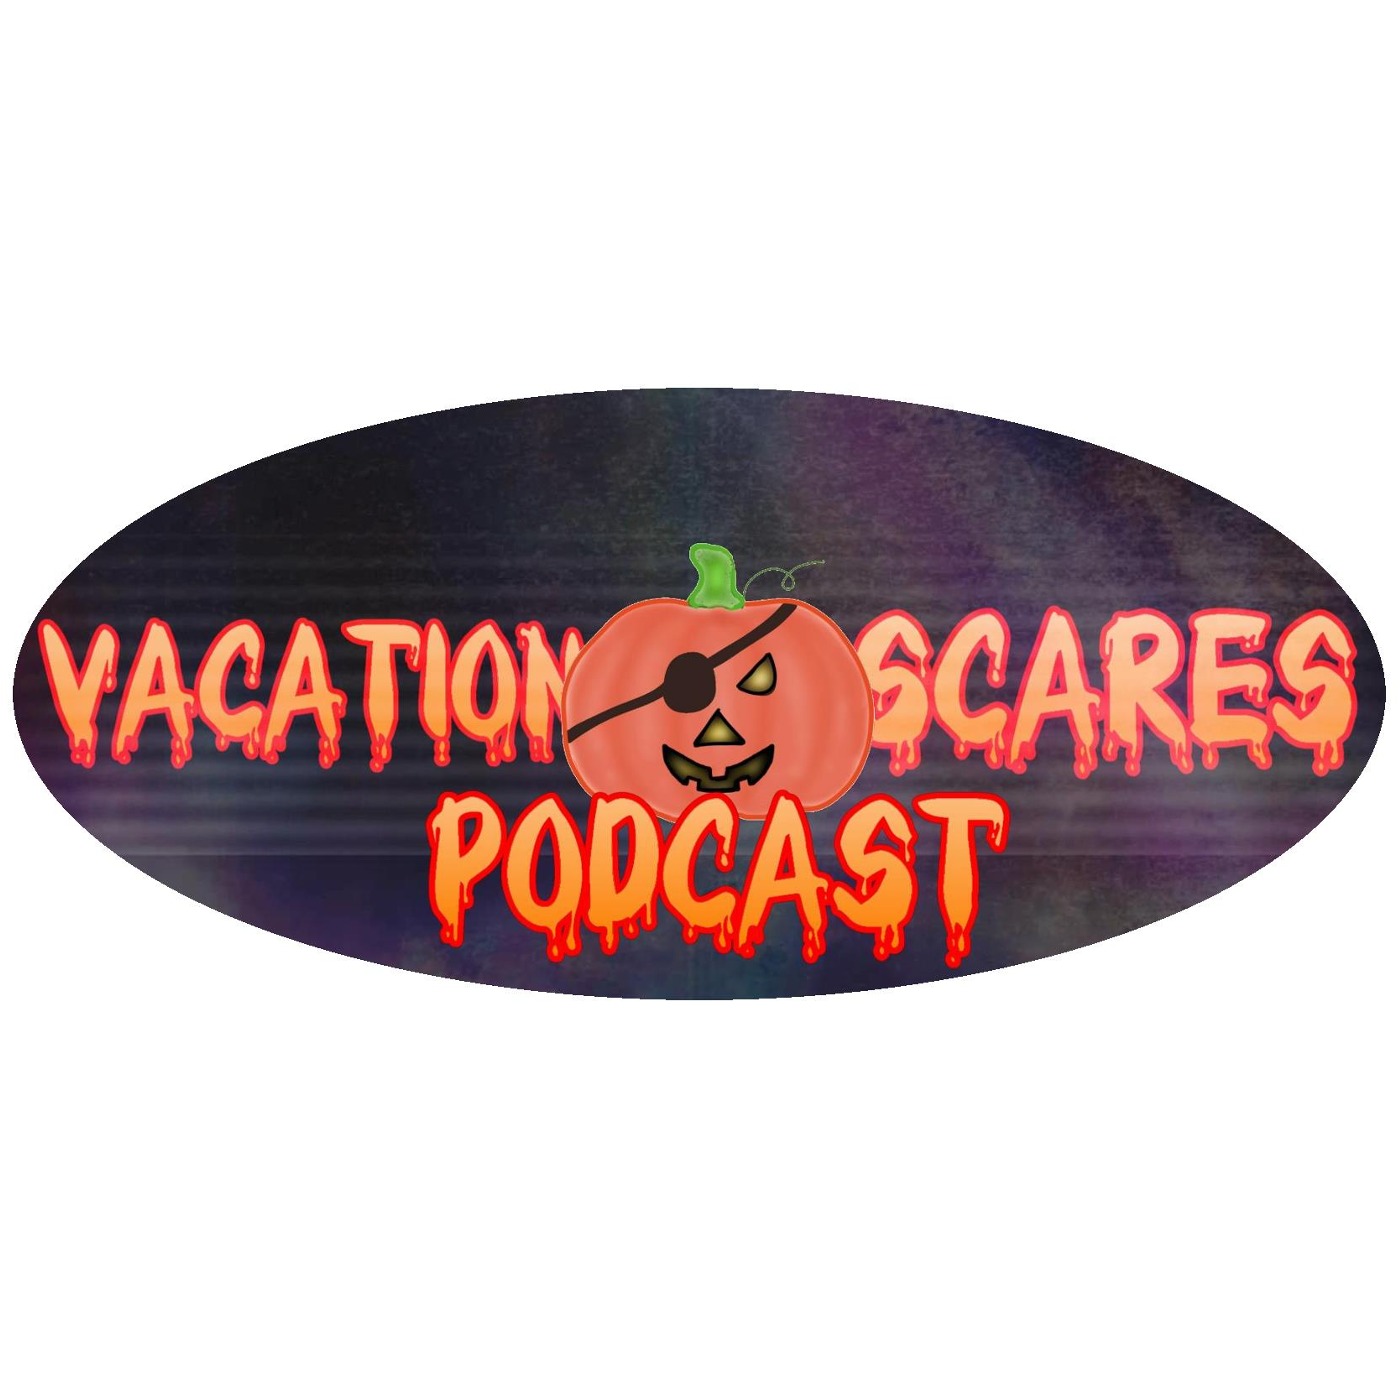 VacationScares 158: Overviews of the Halloween Events We are Experiencing This Year